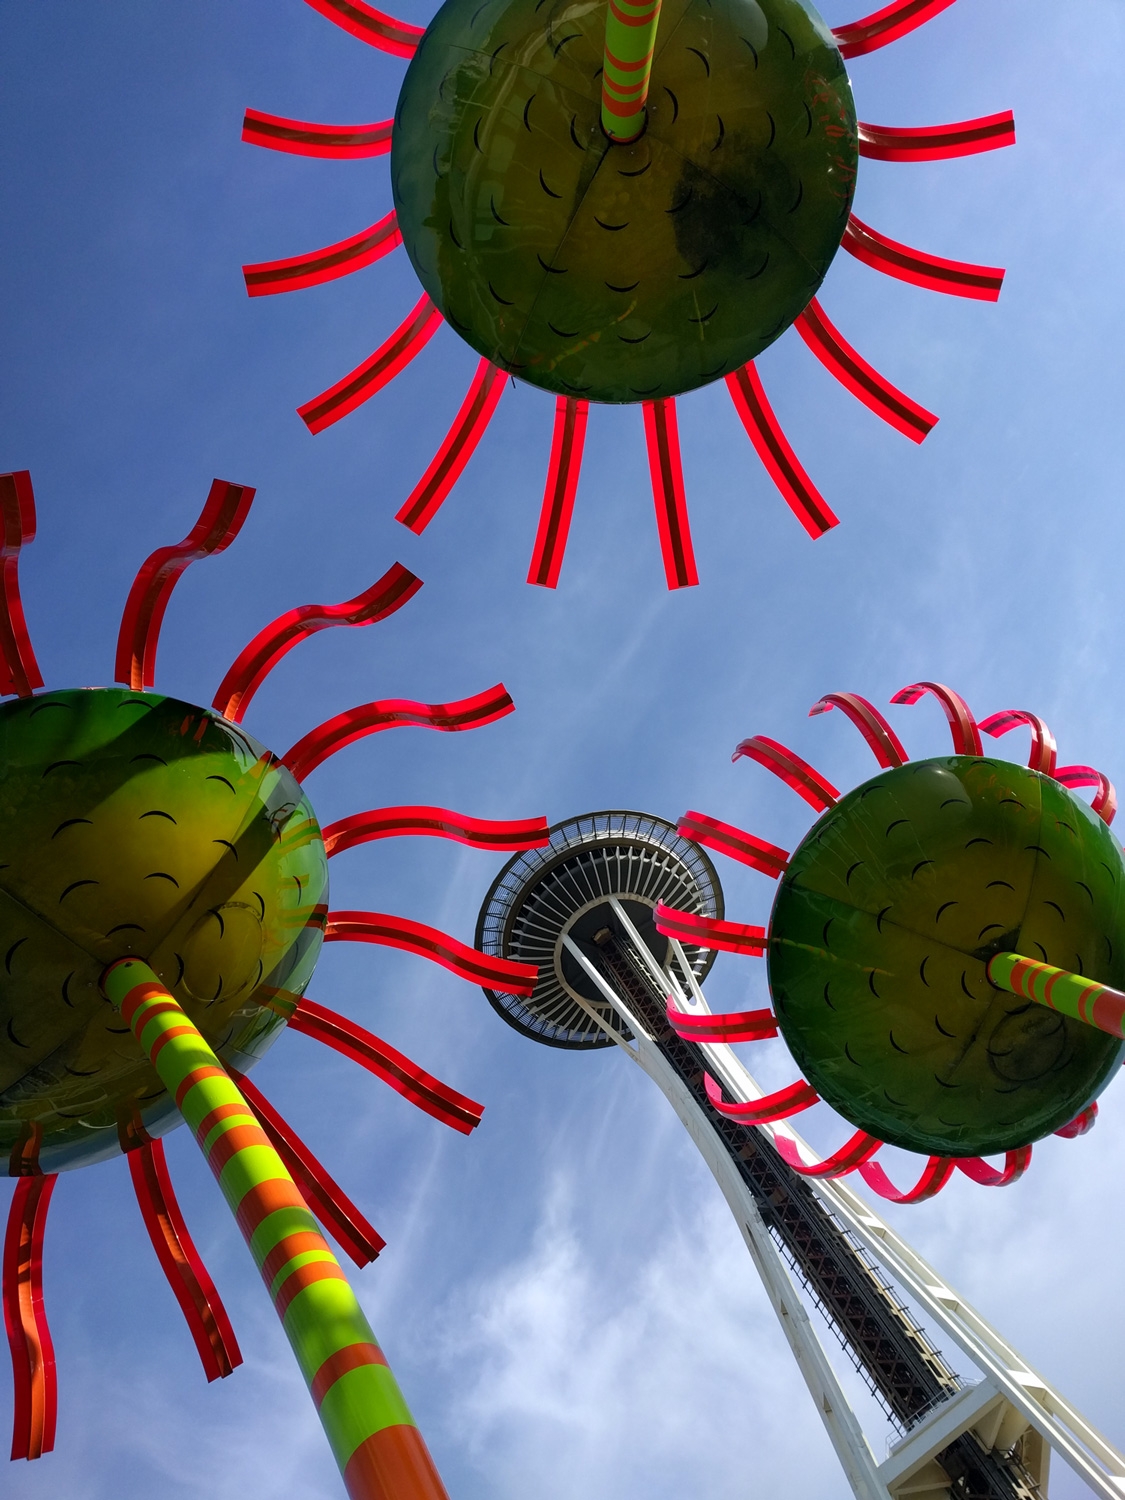 Chihuly Near The Needle